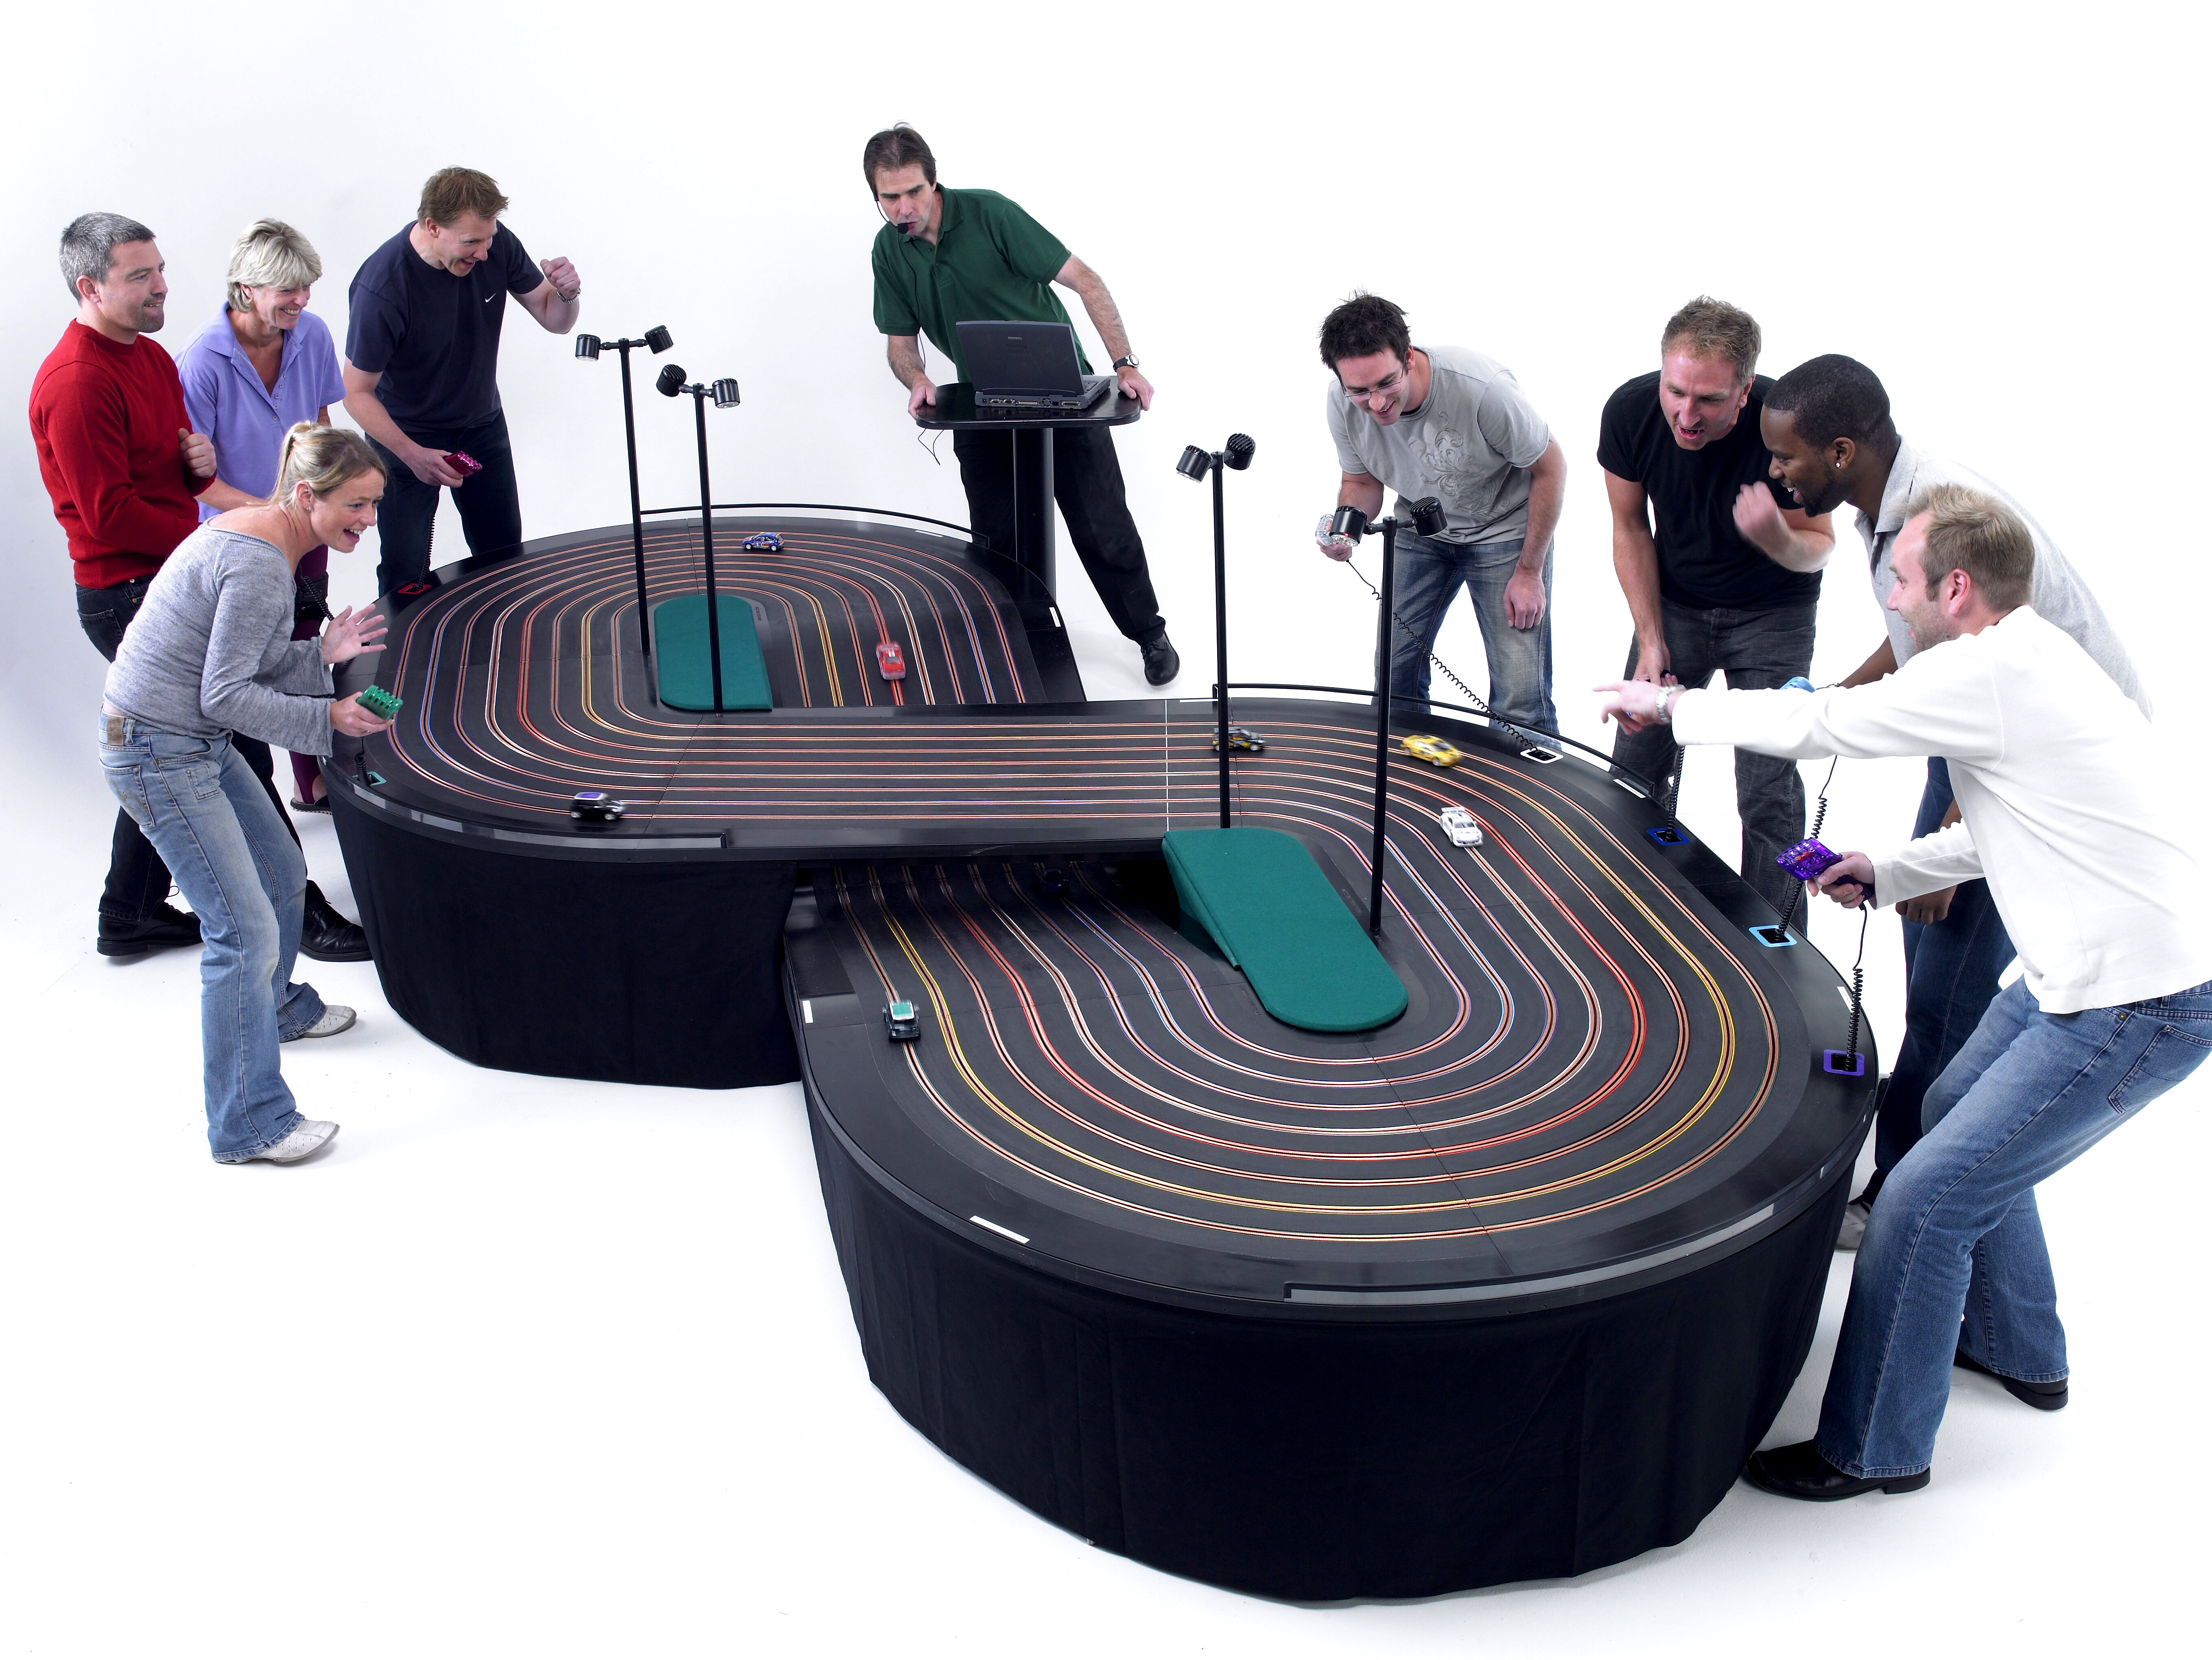 miniracing.com giant 8 lane scalextric track being used in a competition at an event